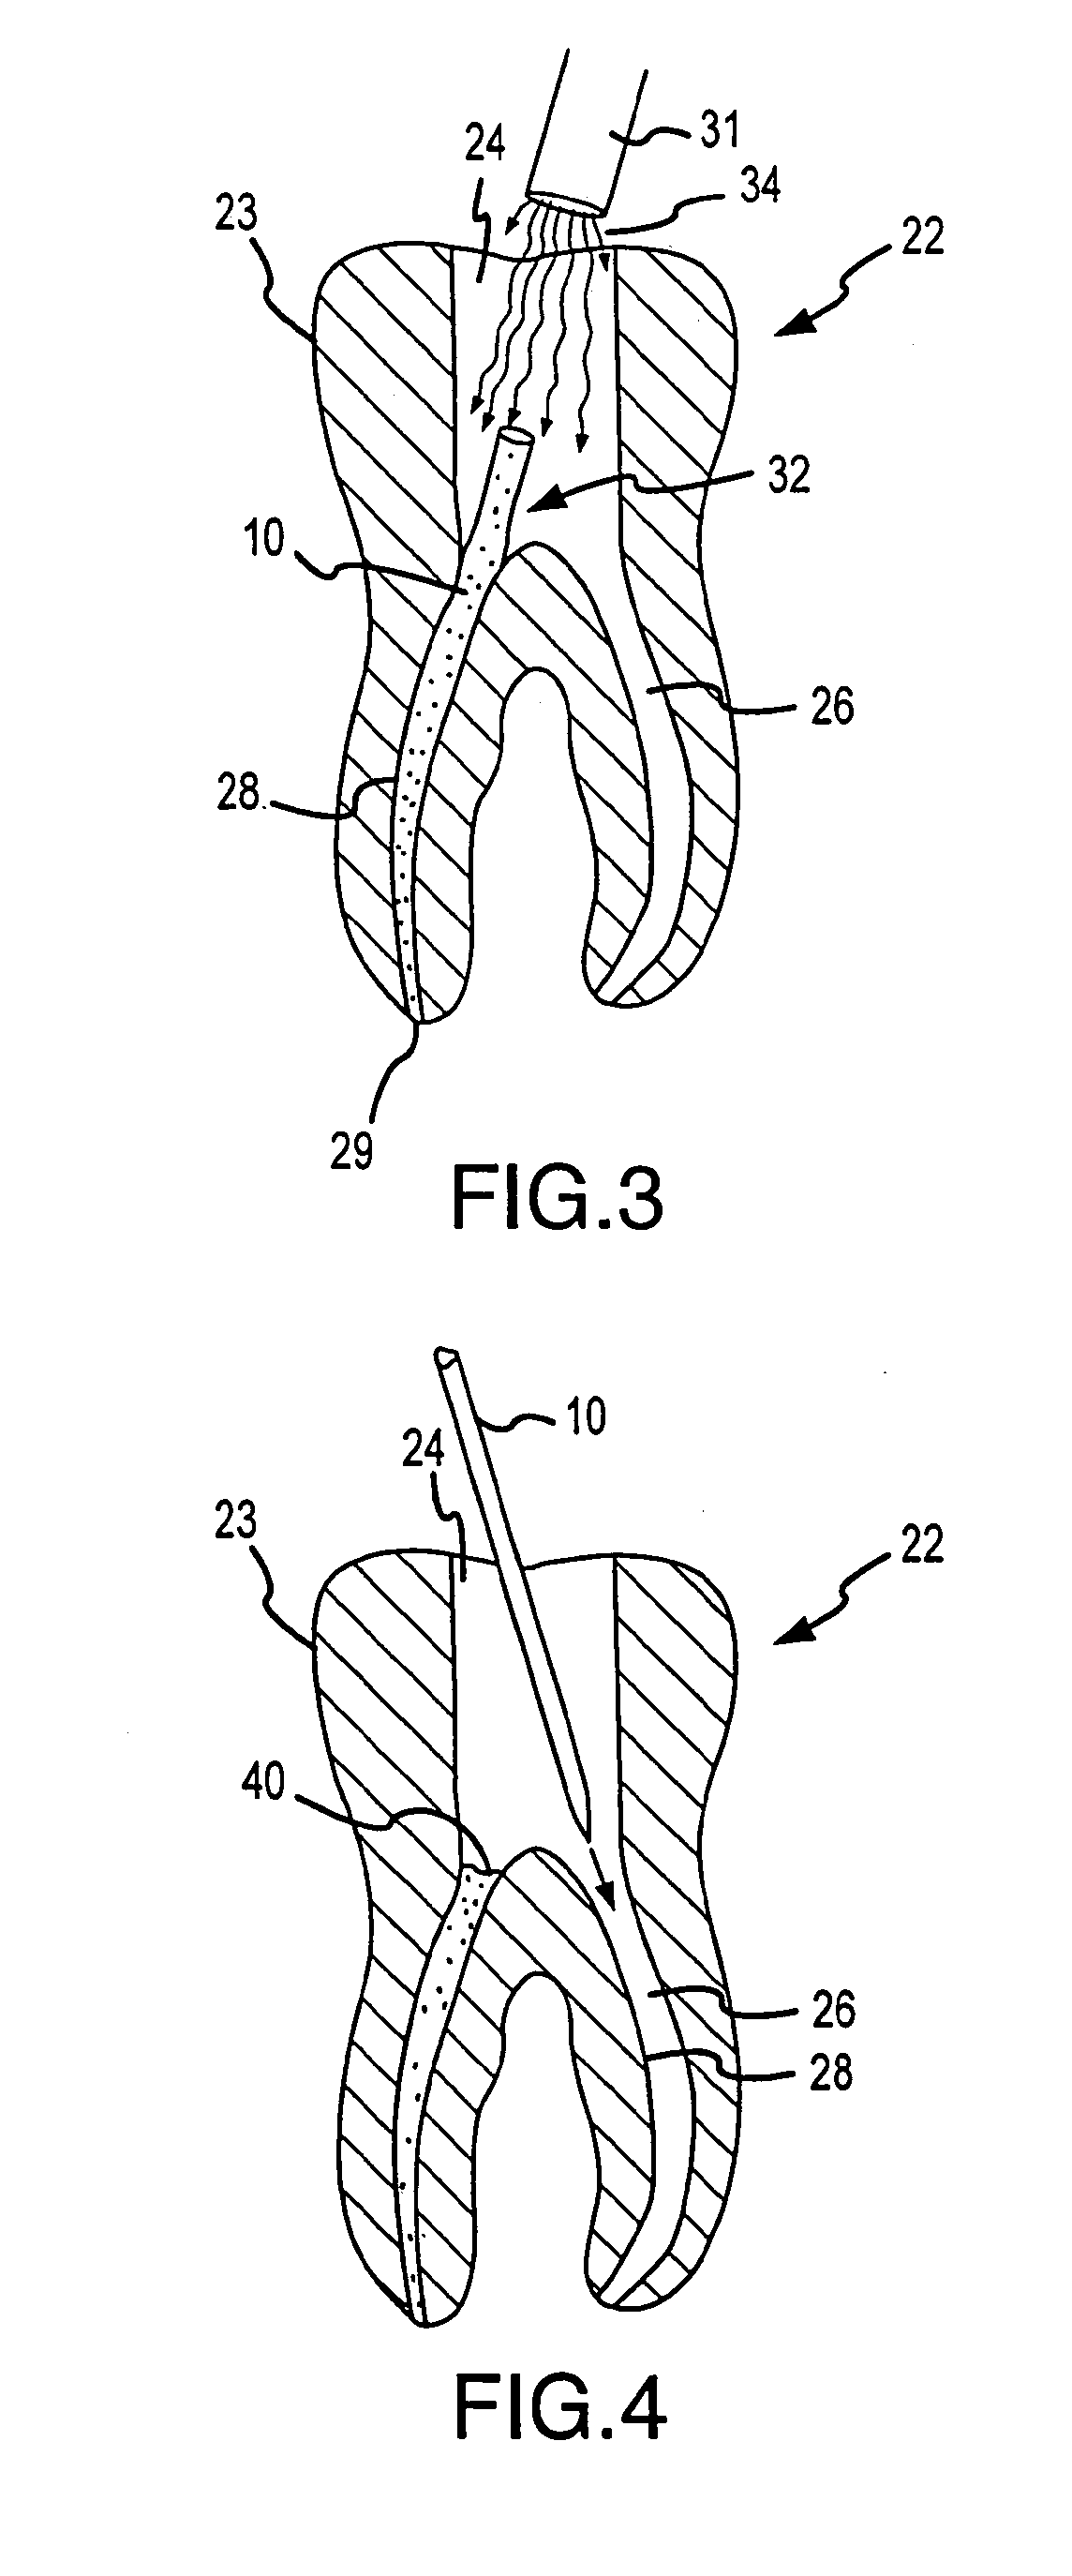 Apparatus and method for root canal obturation